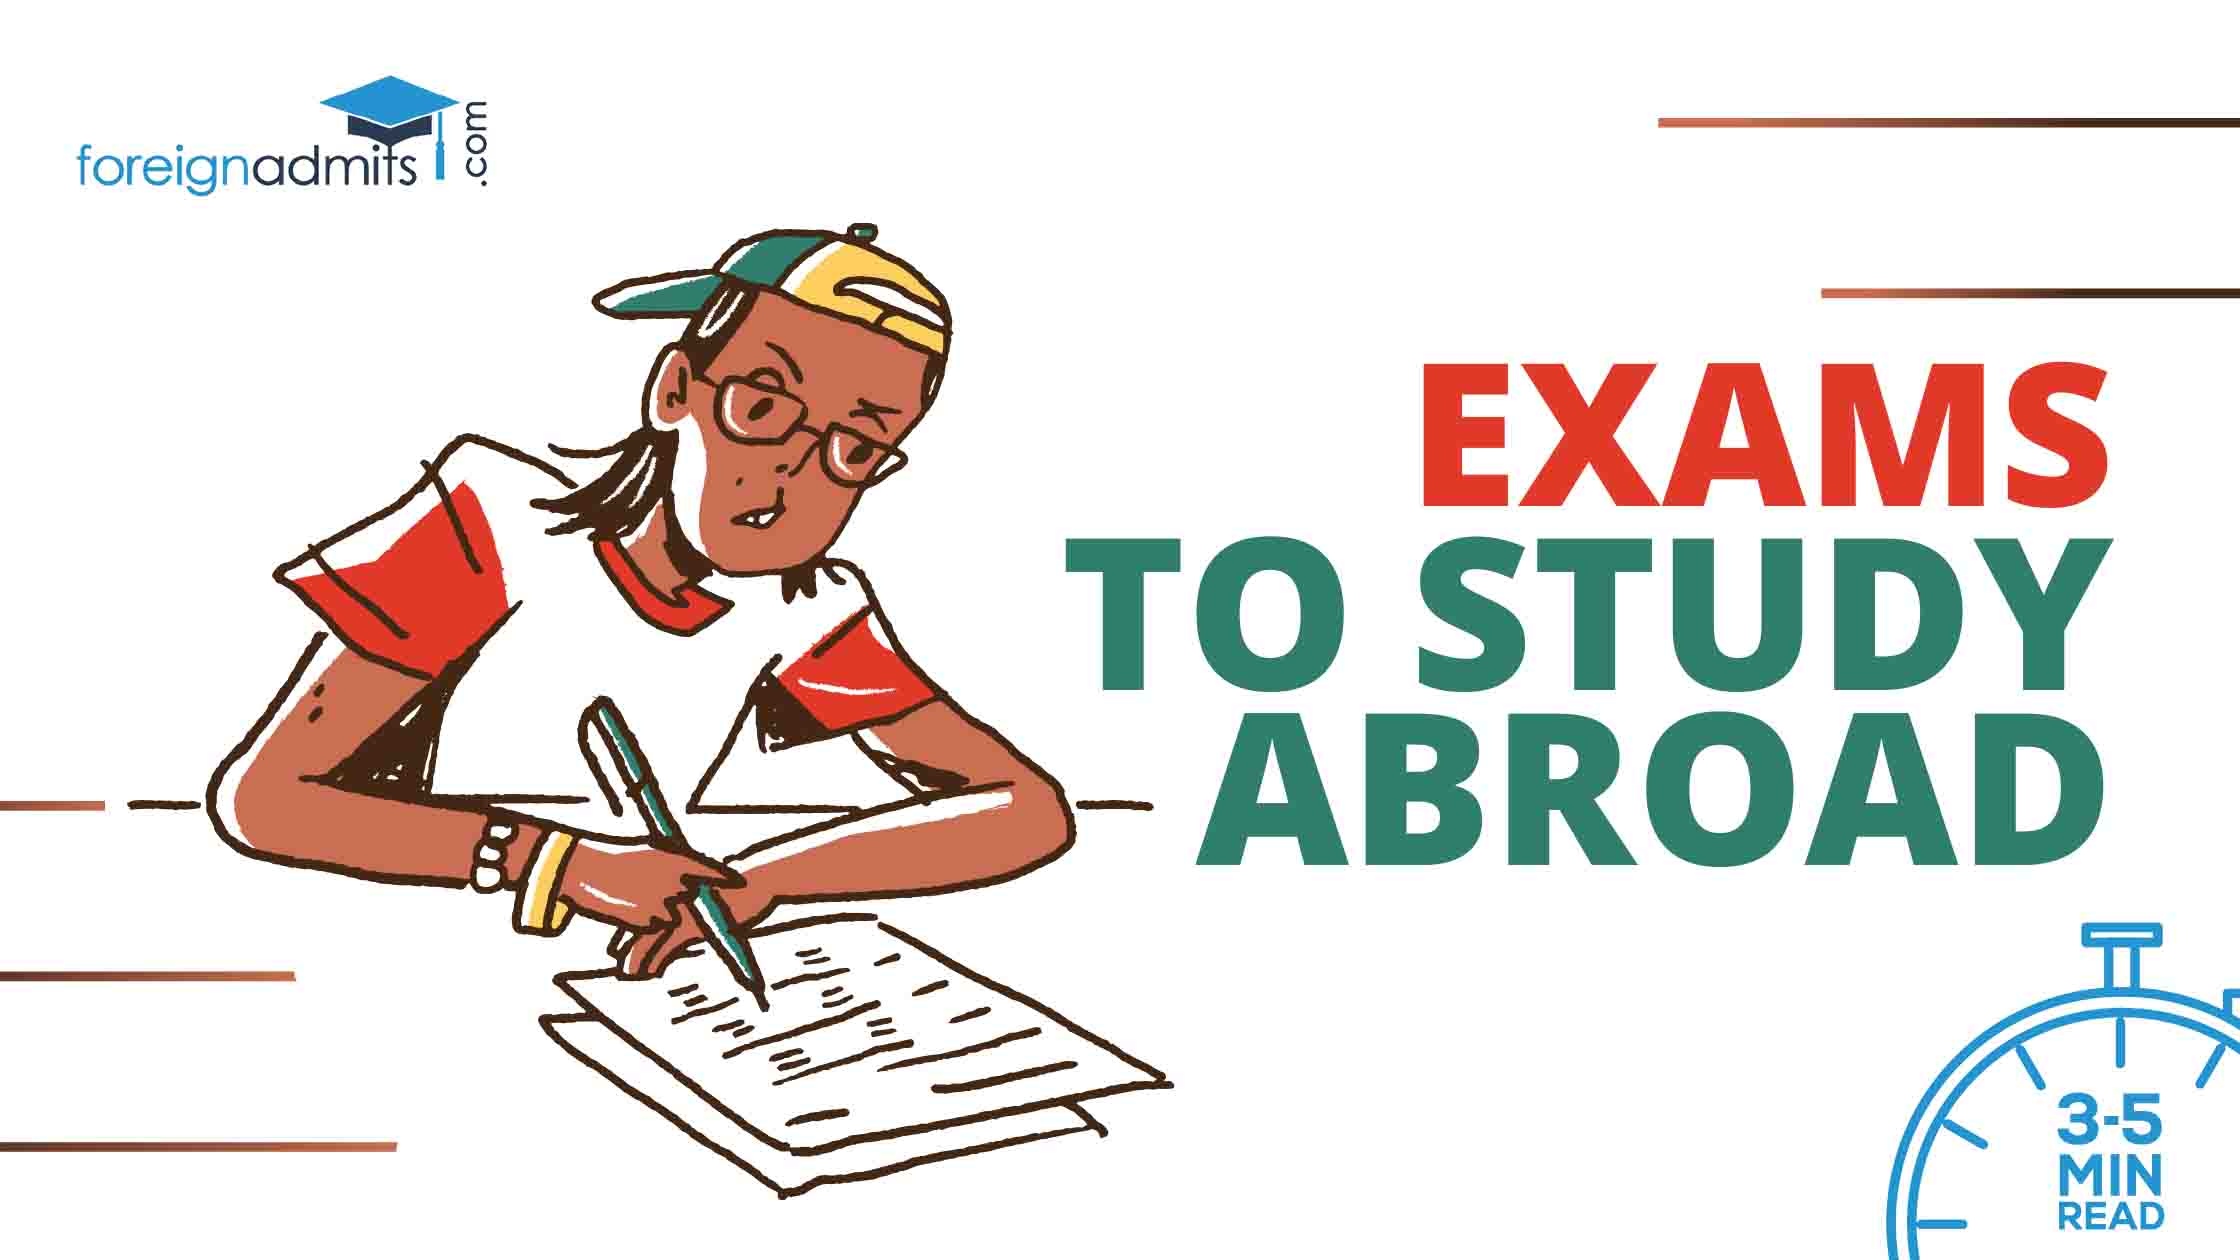 Exams to Study Abroad- Complete List